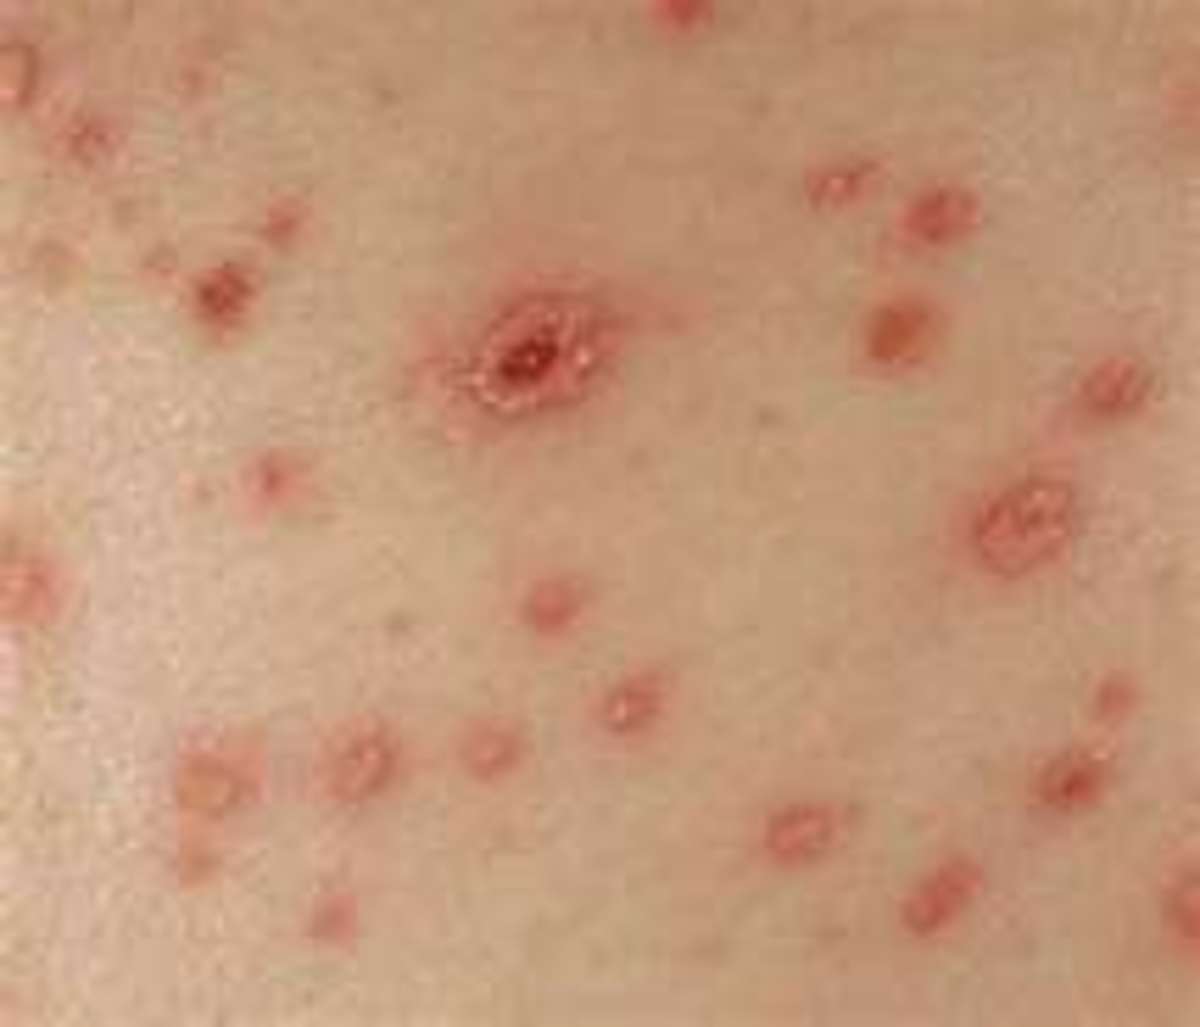 Chigger Symptoms and Treatment